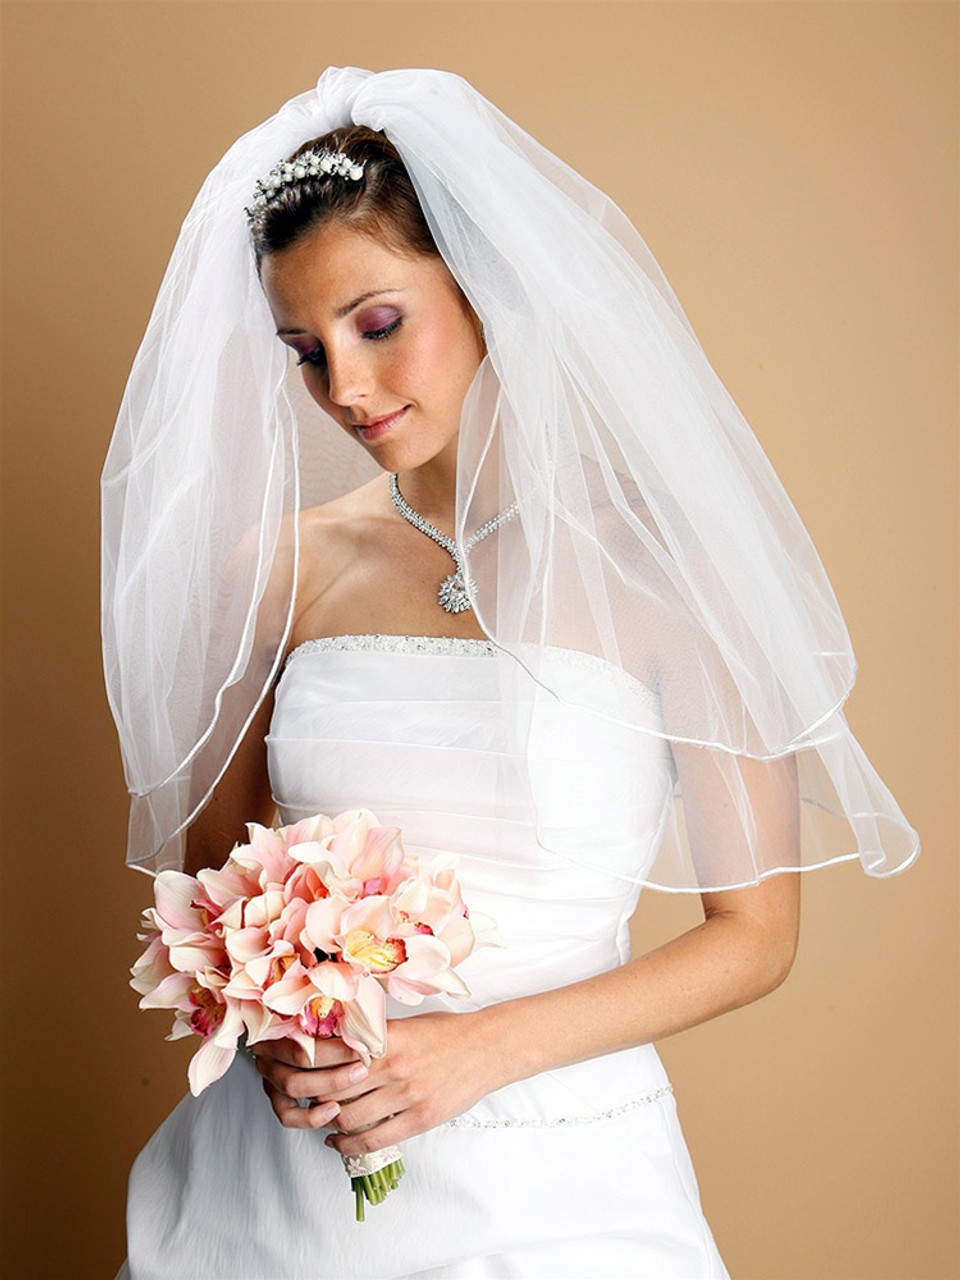 One Blushing Bride Two Tier Drop Wedding Veil, Long Veil with Blusher, Double Layer White / Chapel 90